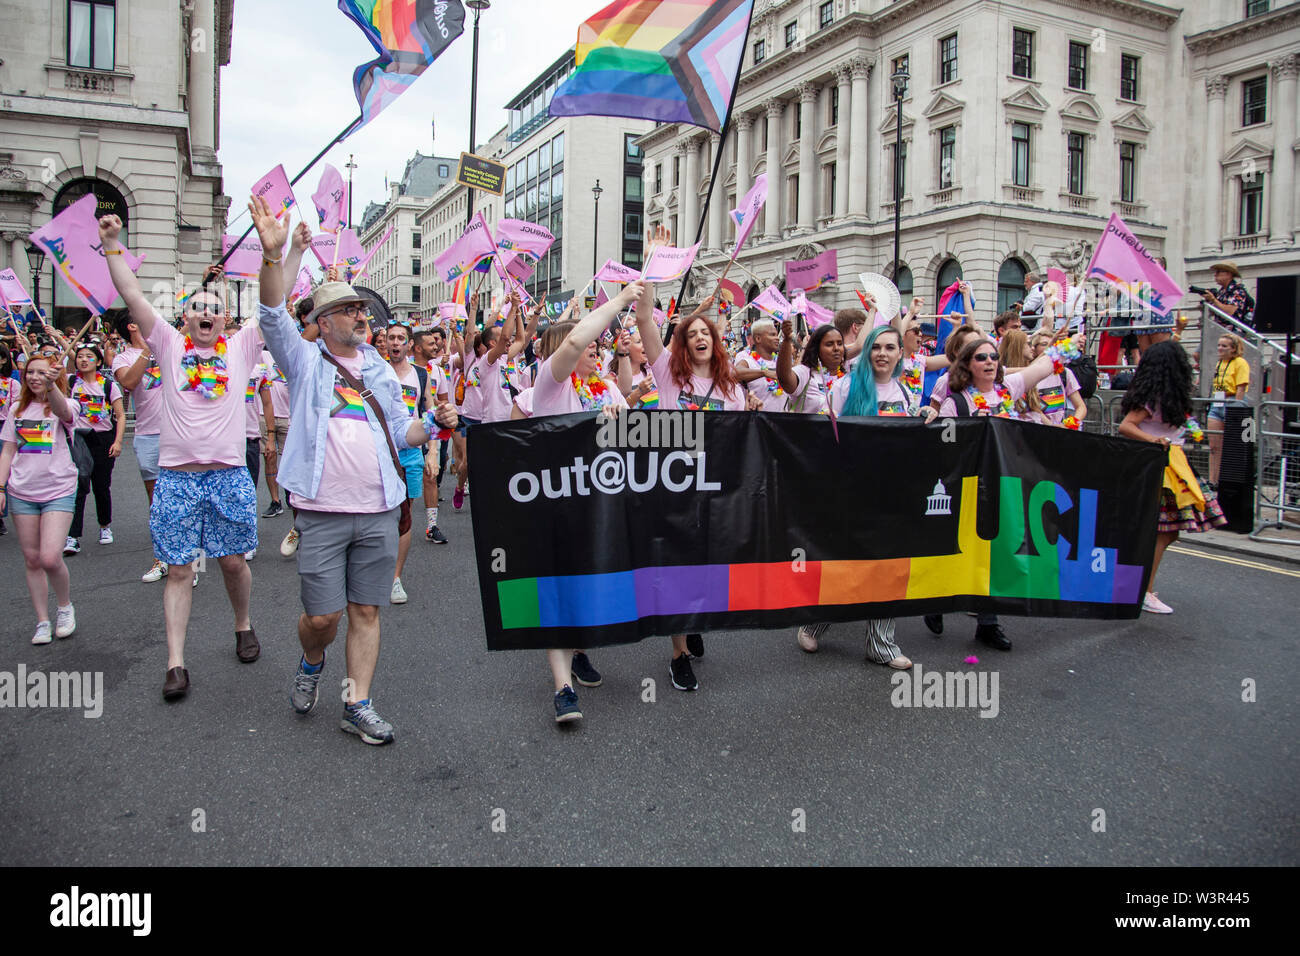 LONDON, UK - July 6th 2019: Staff from University College London take part in the annual gay pride march in central London Stock Photo